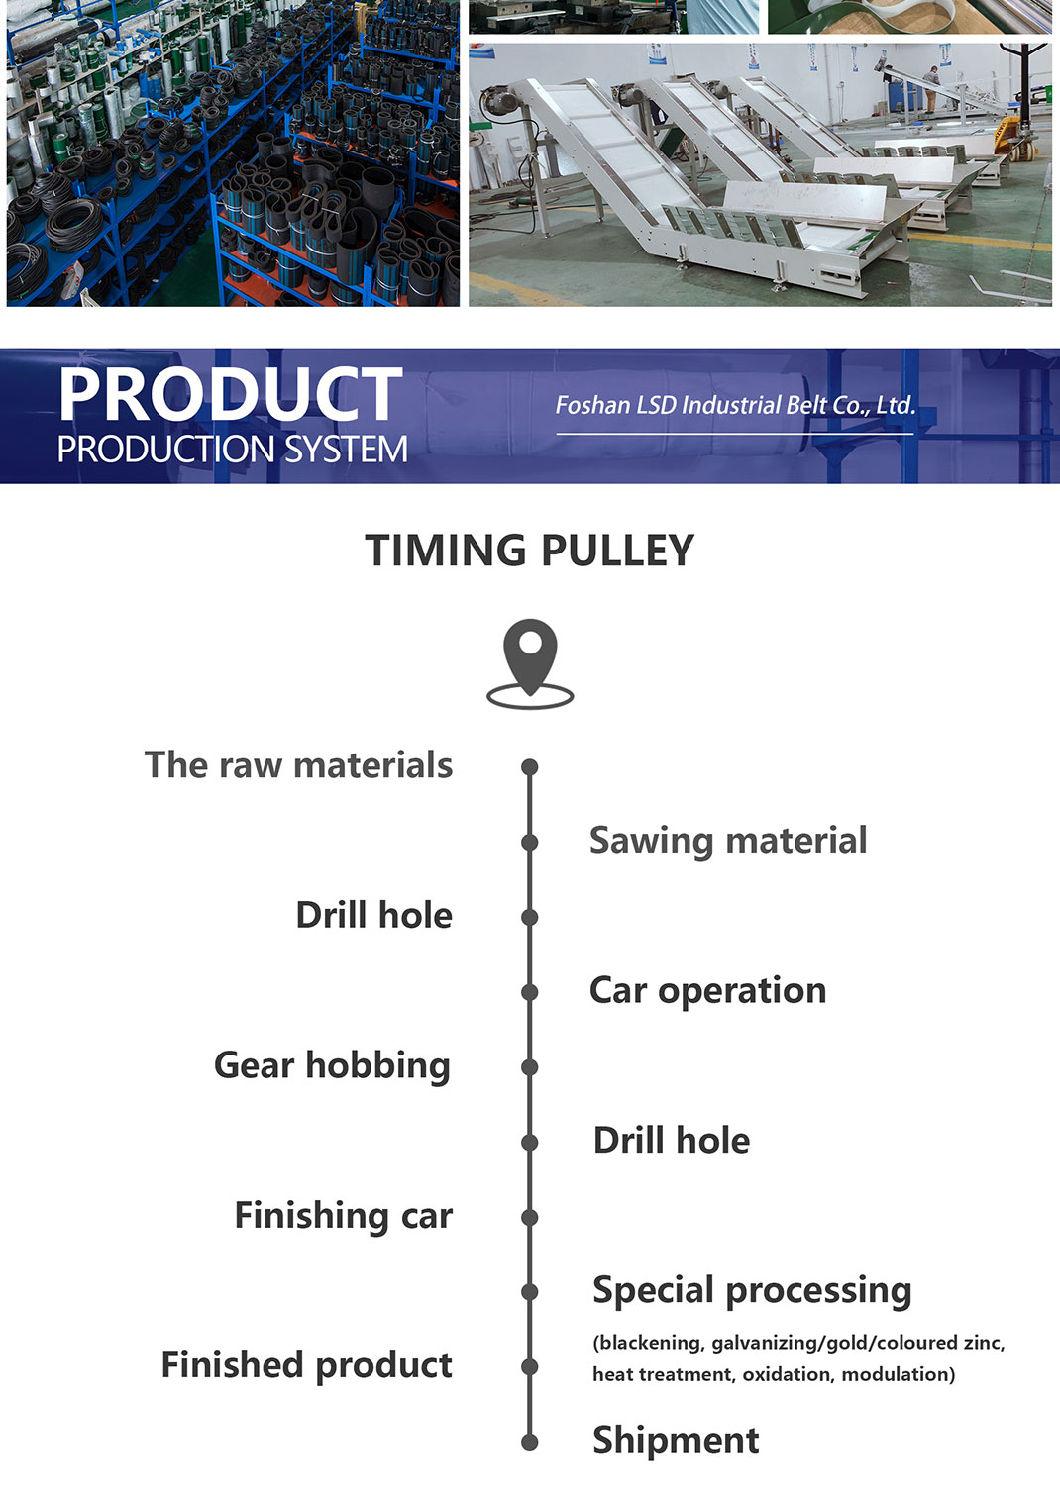 Customized Multi-Spec Synchronous Belt Drive Pulley Timing Pulley